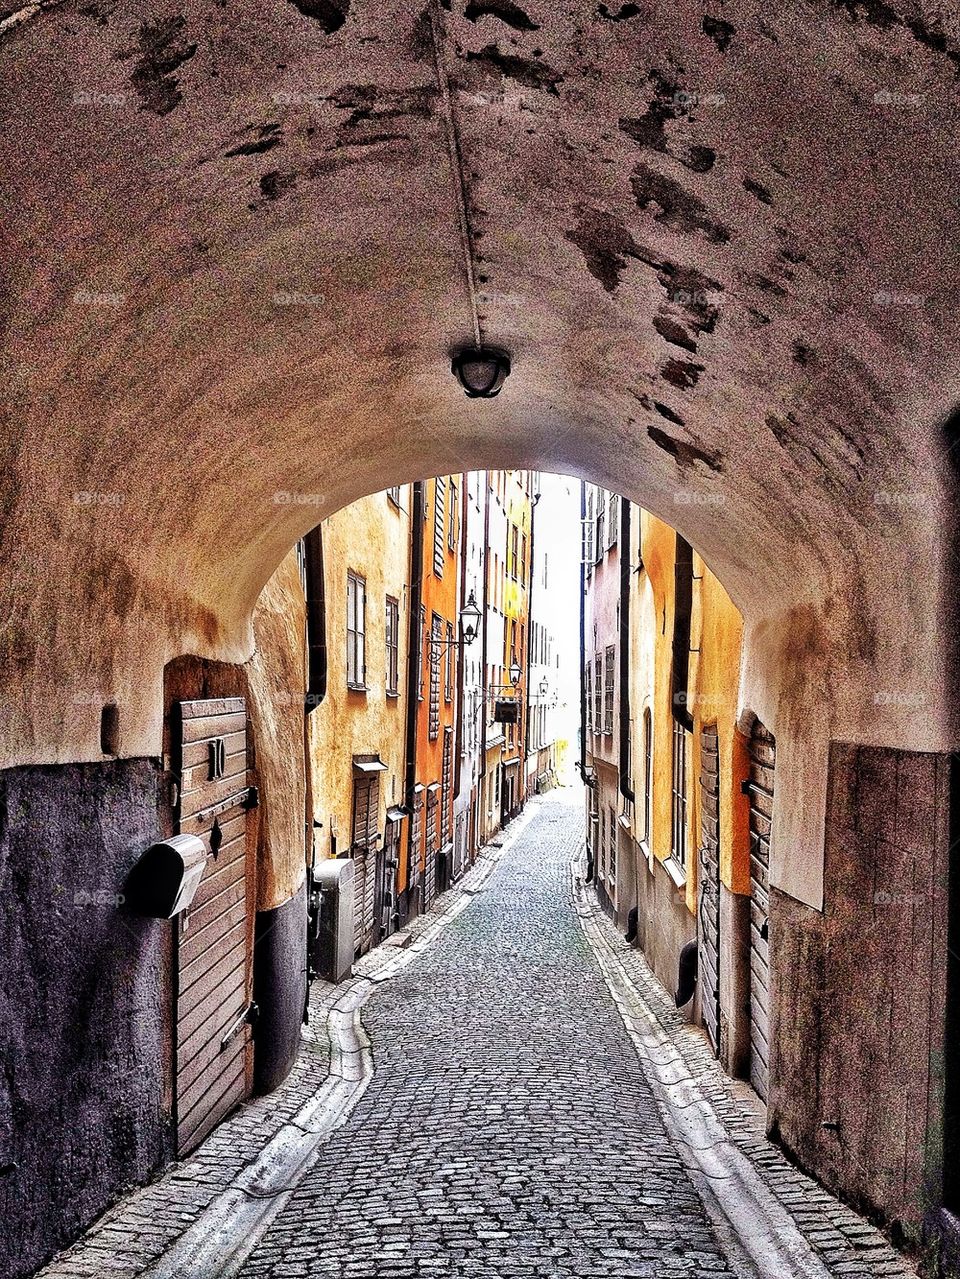 View of alley